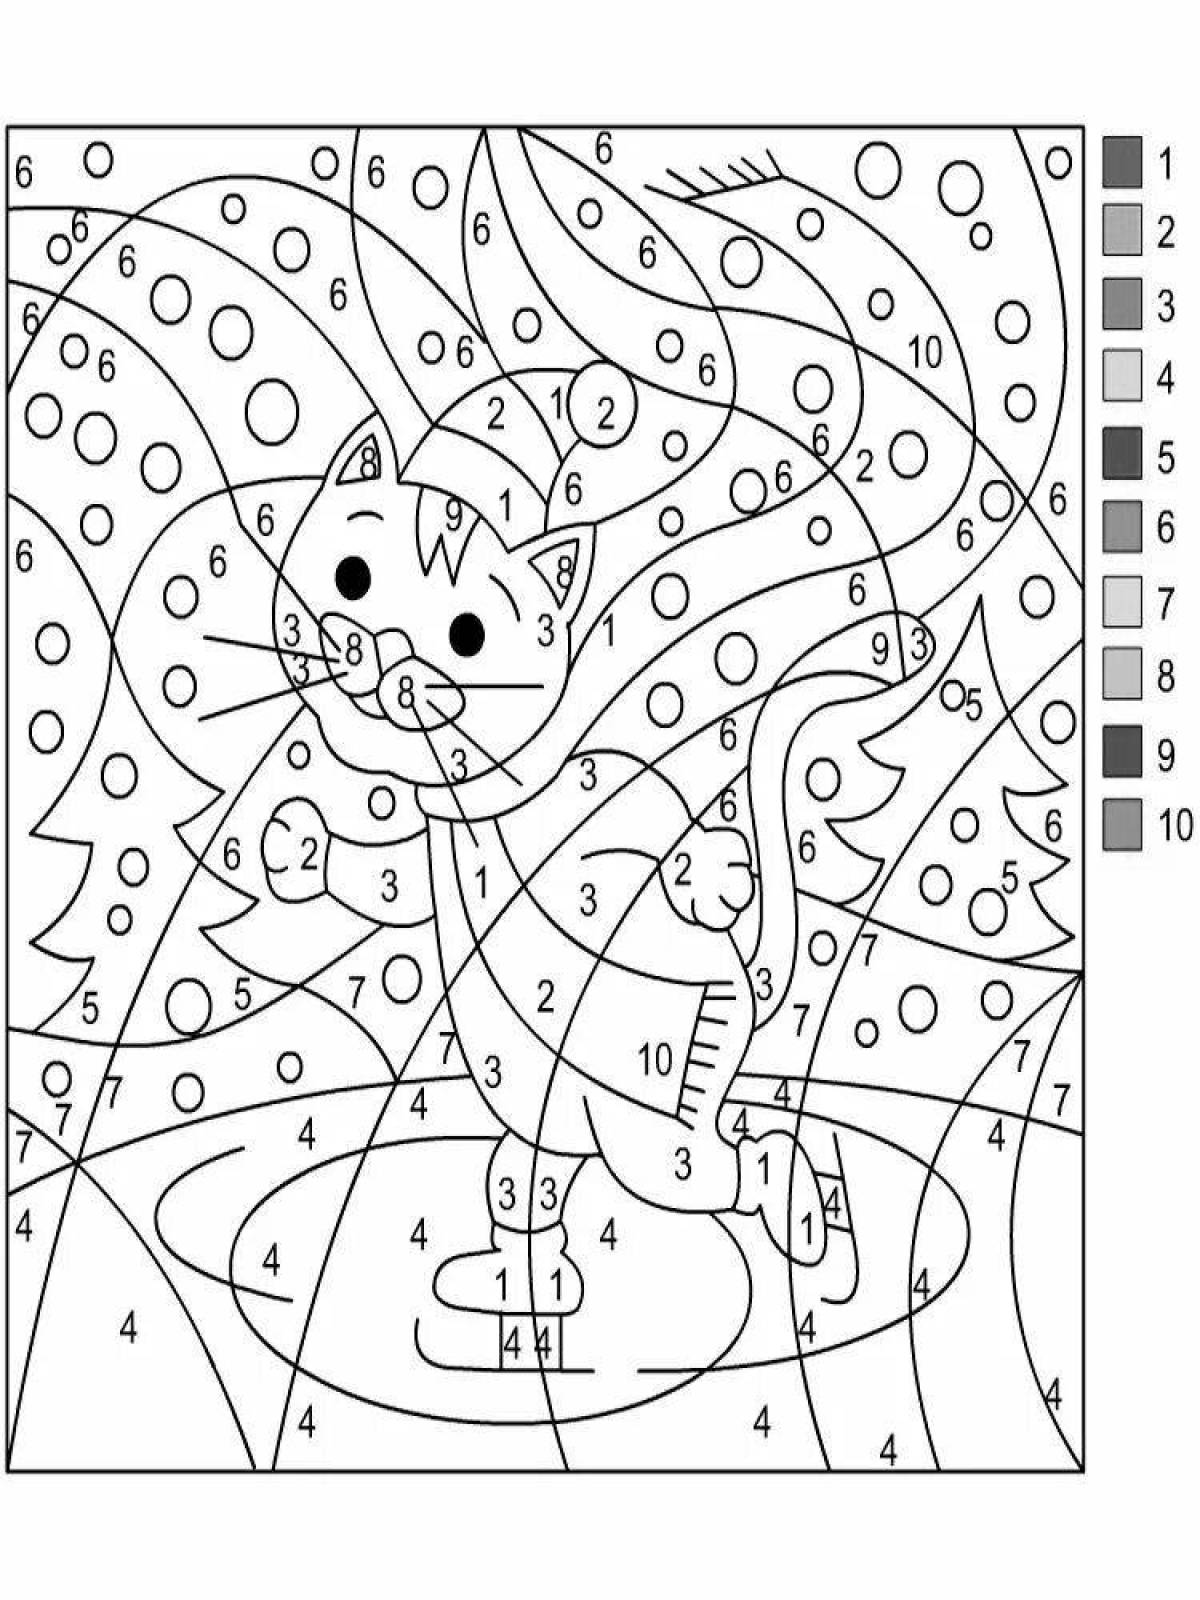 Glorious New Year in numbers coloring page